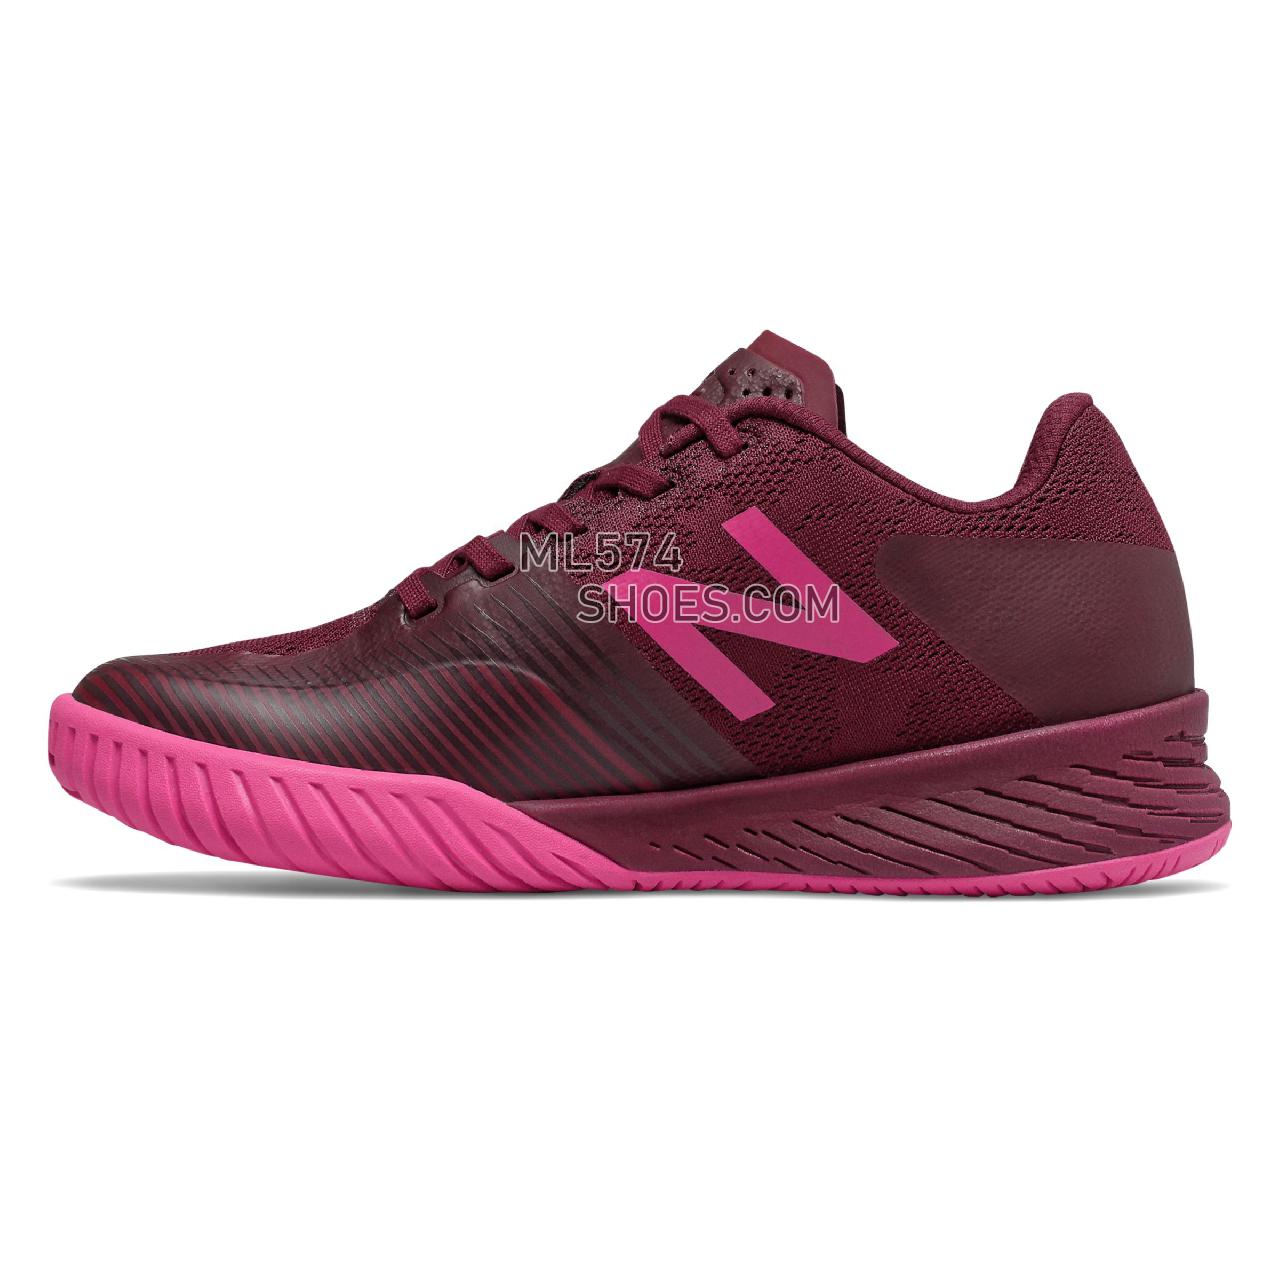 New Balance 896v3 - Women's Tennis - Burgundy with Vivid Coral - WCH896P3